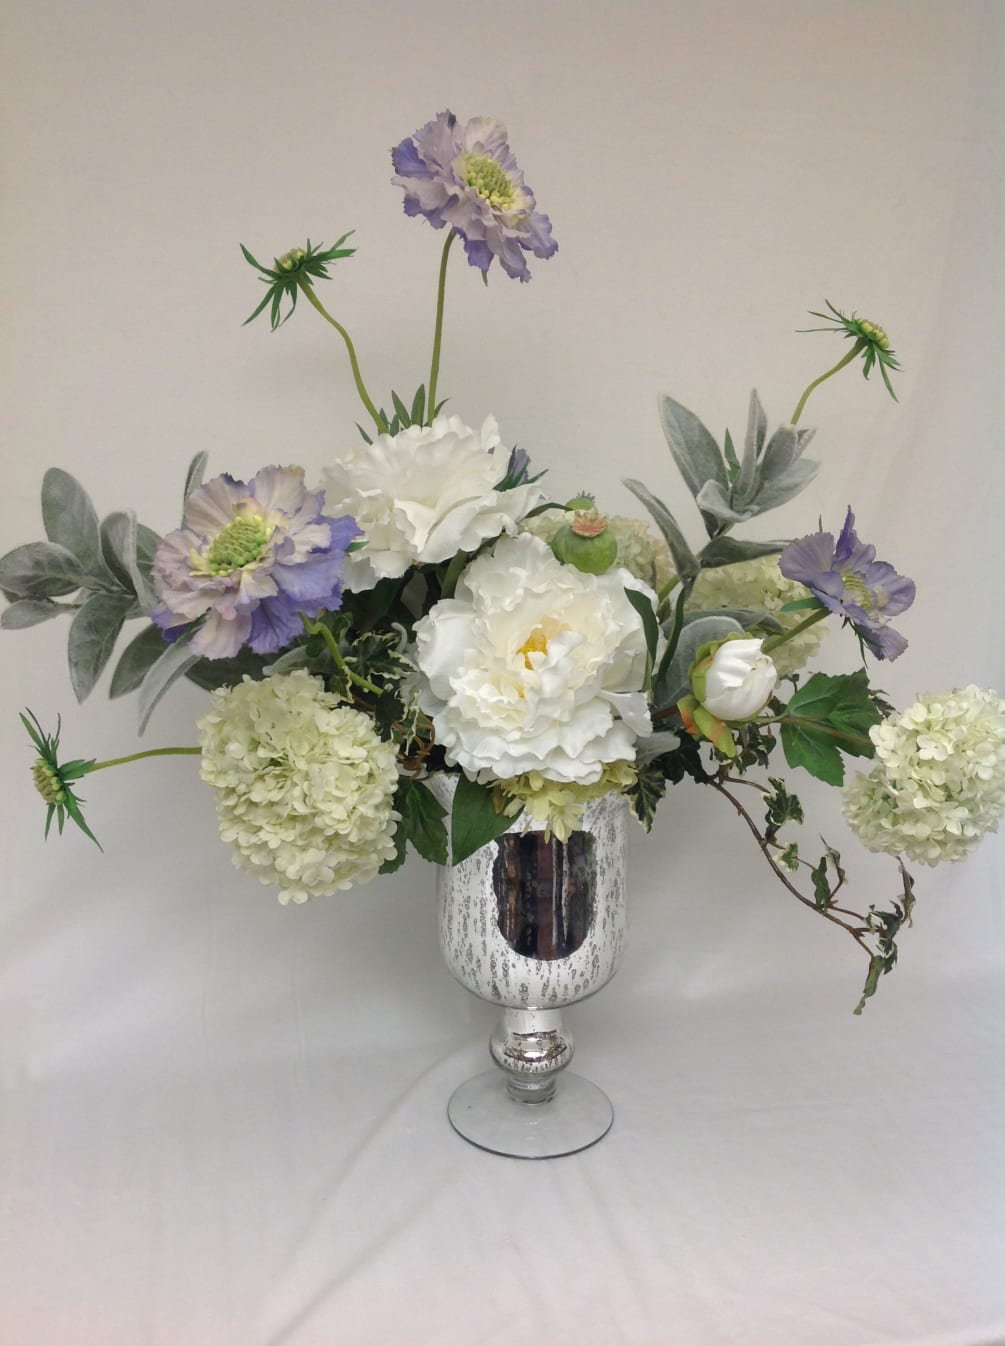 Almost neutral with the perfect lavender accent colors
Beauty everlasting with faux botanicals